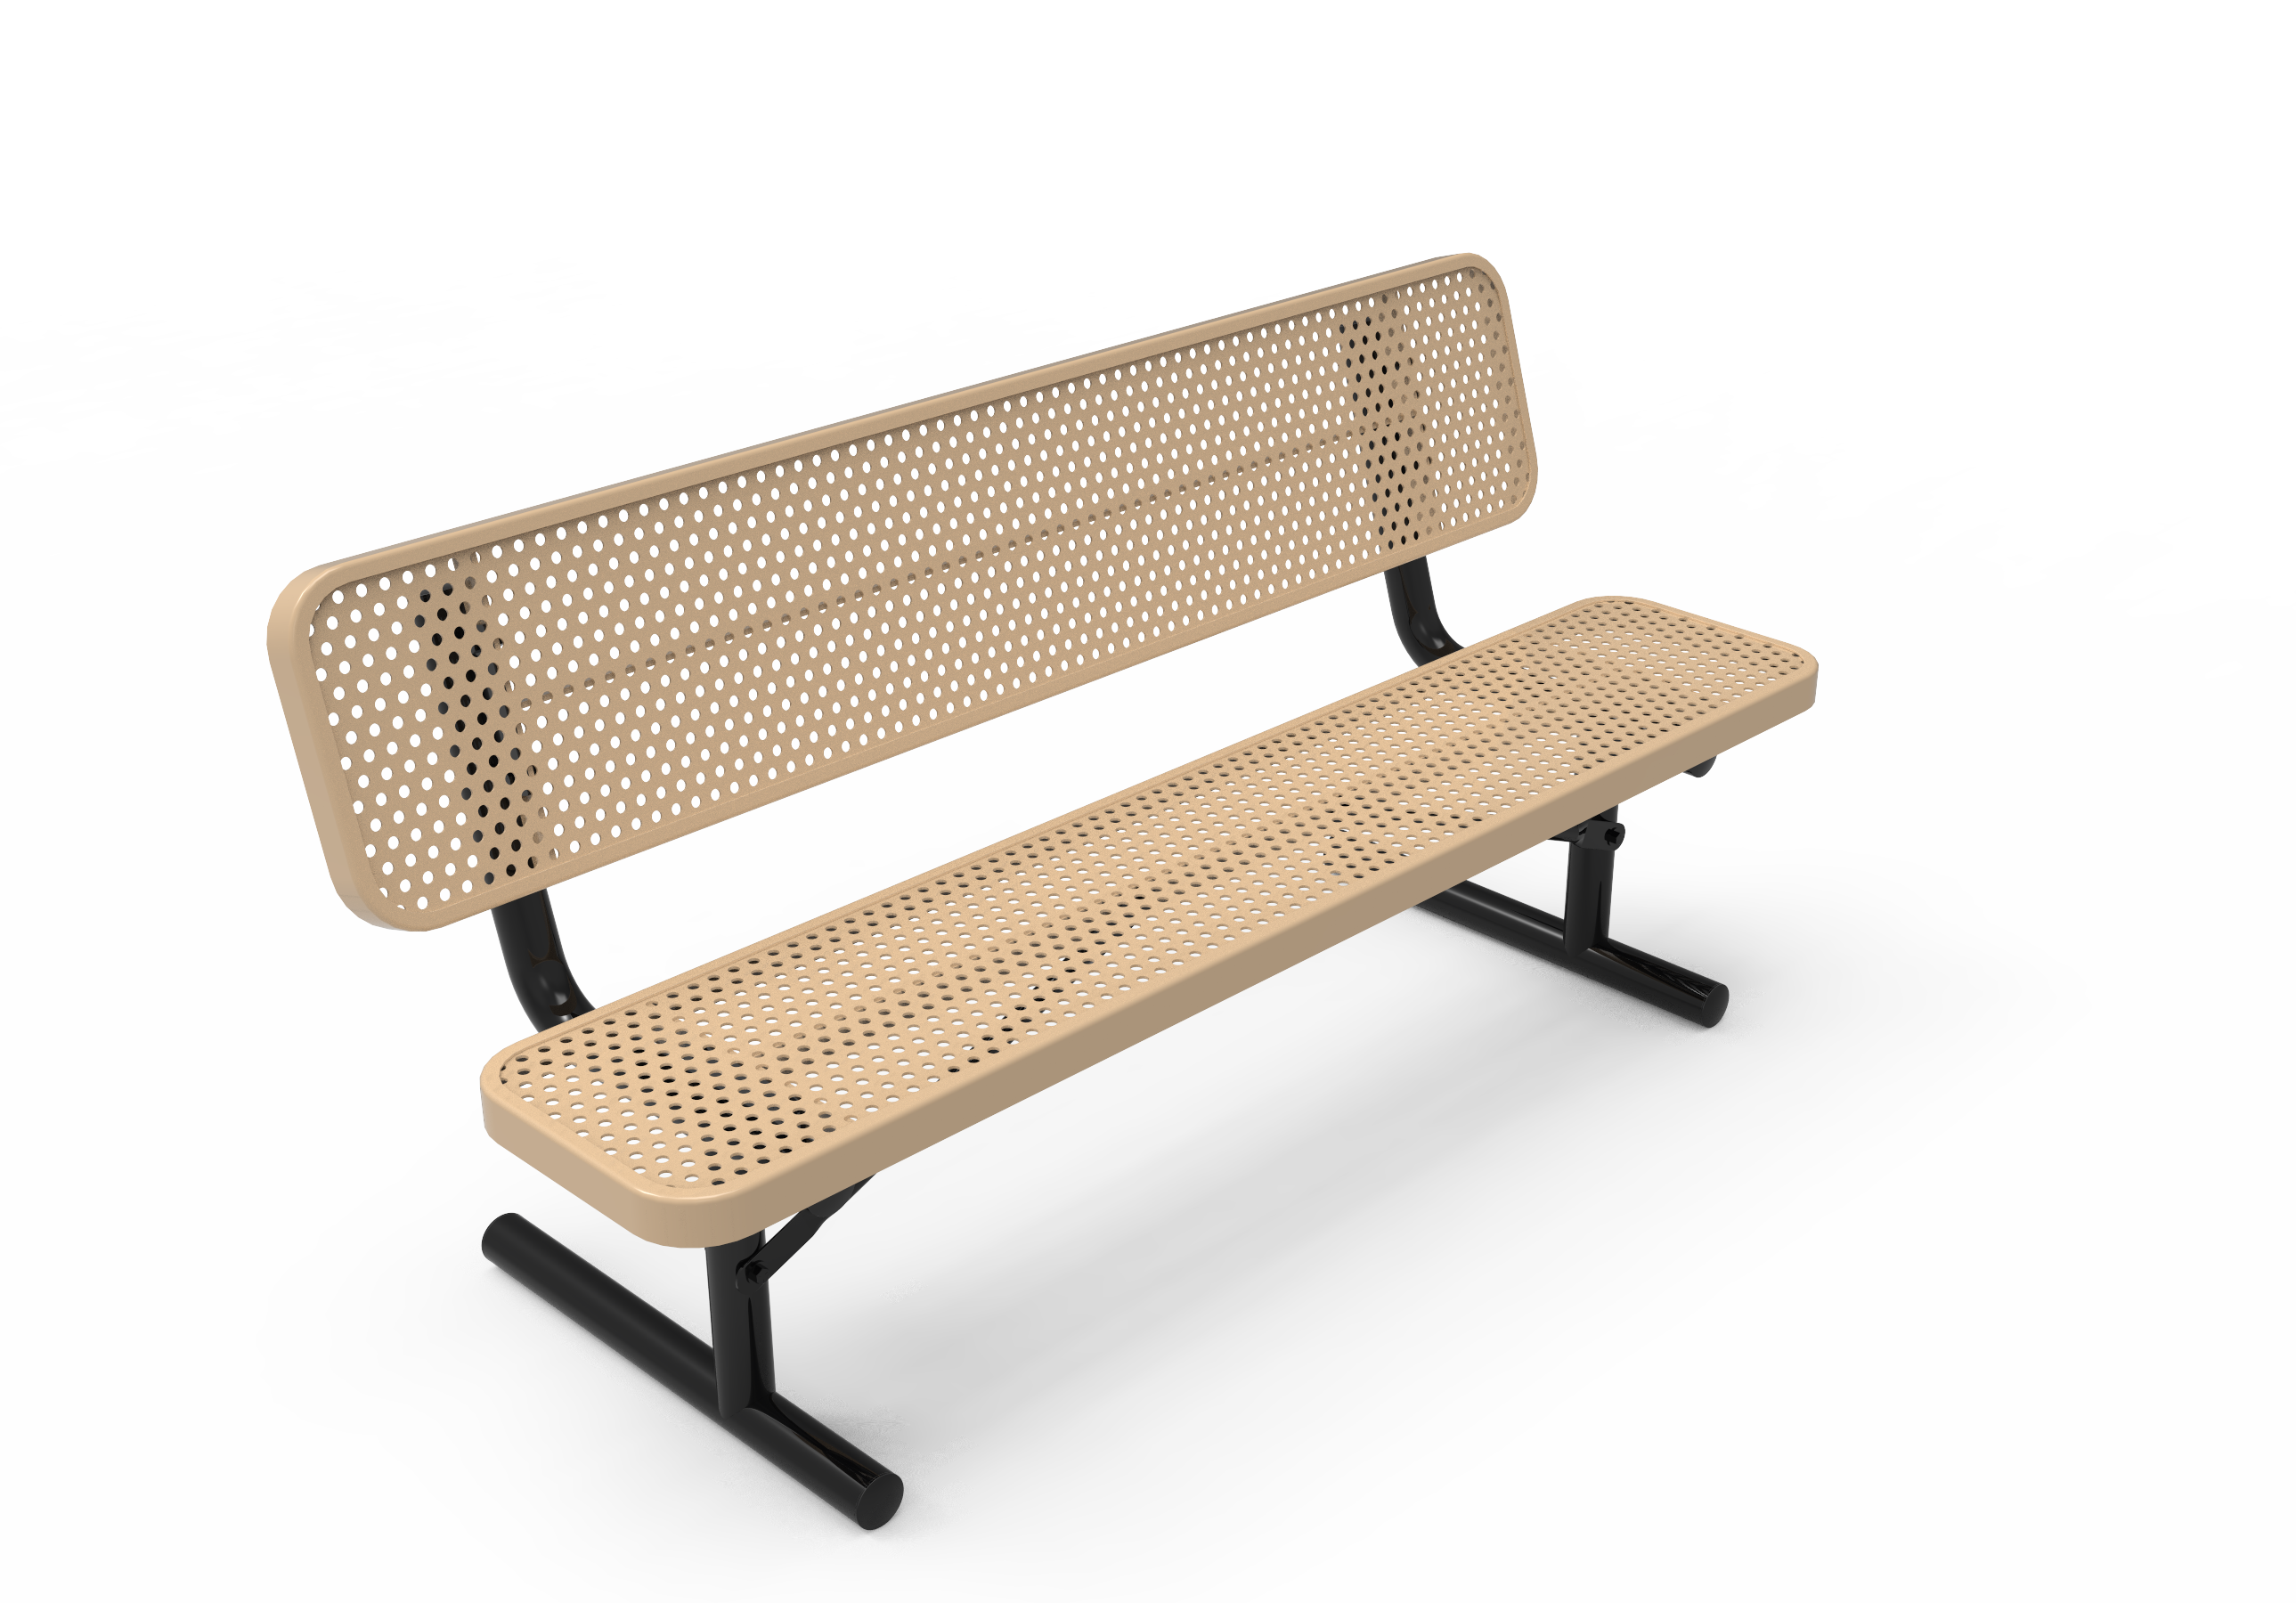 6′ Players Bench With Back-Punched
BPY06-D-30-000
Industry Standard Finish
$879.00
BPY06-B-30-000
Advantage Premium Finish
$1099.00
